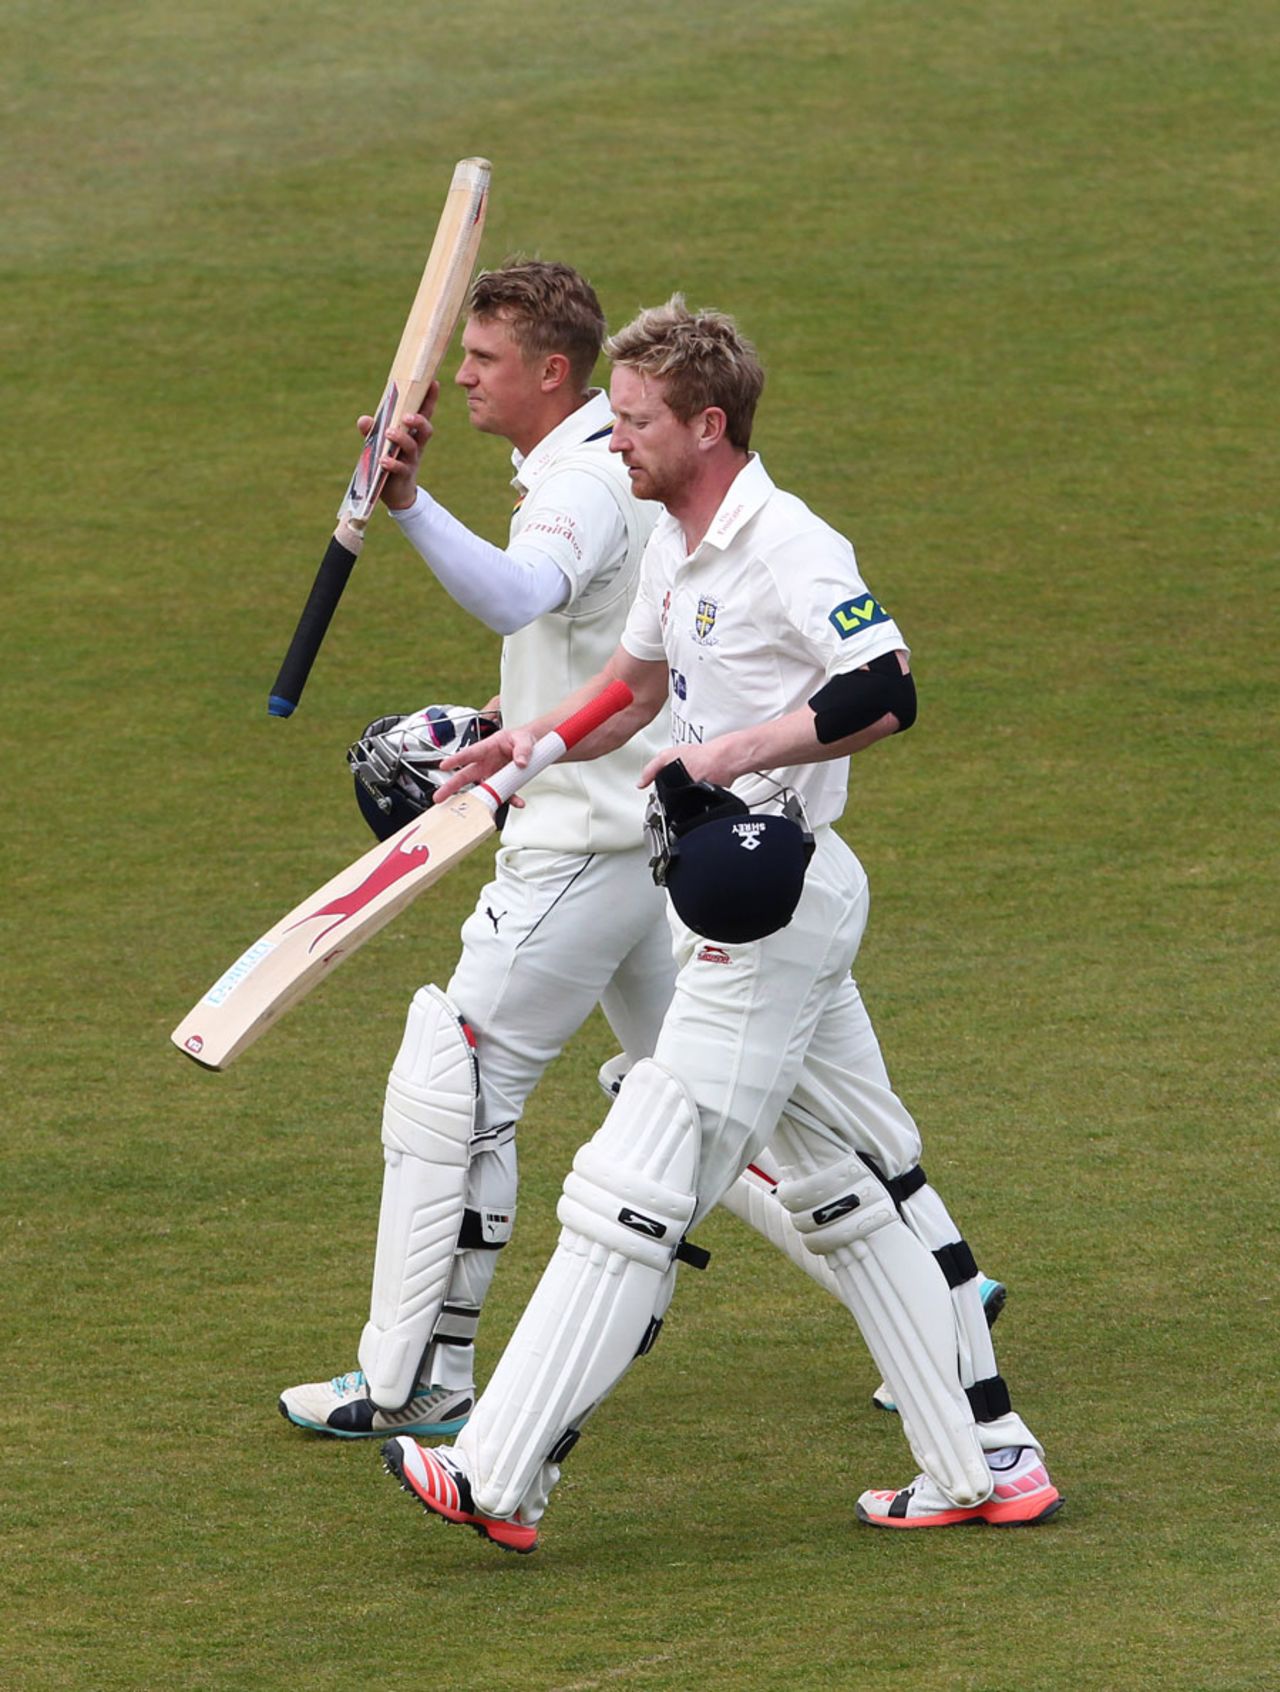 Scott Borthwick and Paul Collingwood completed the run chase, Durham v Sussex, County Championship, Division One, Chester-le-Street, 4th day, April 29, 2015